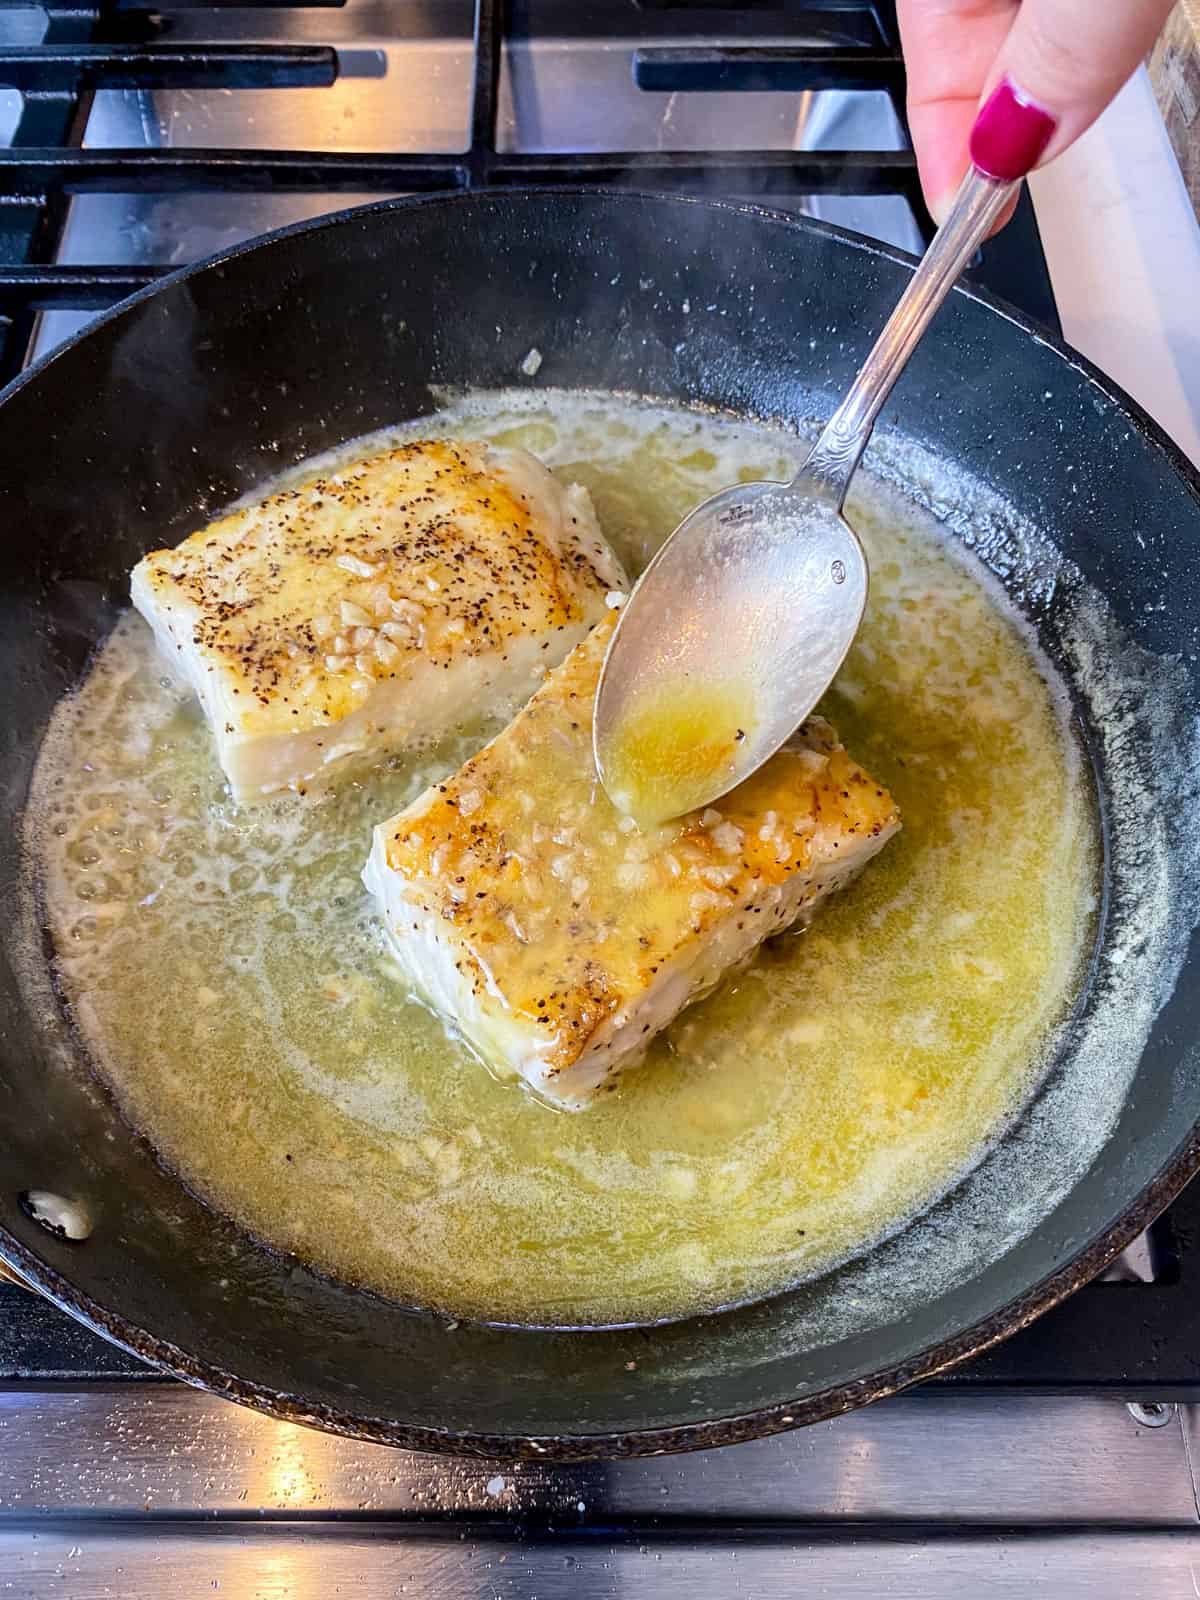 Baste the seared halibut with the lemon butter sauce.